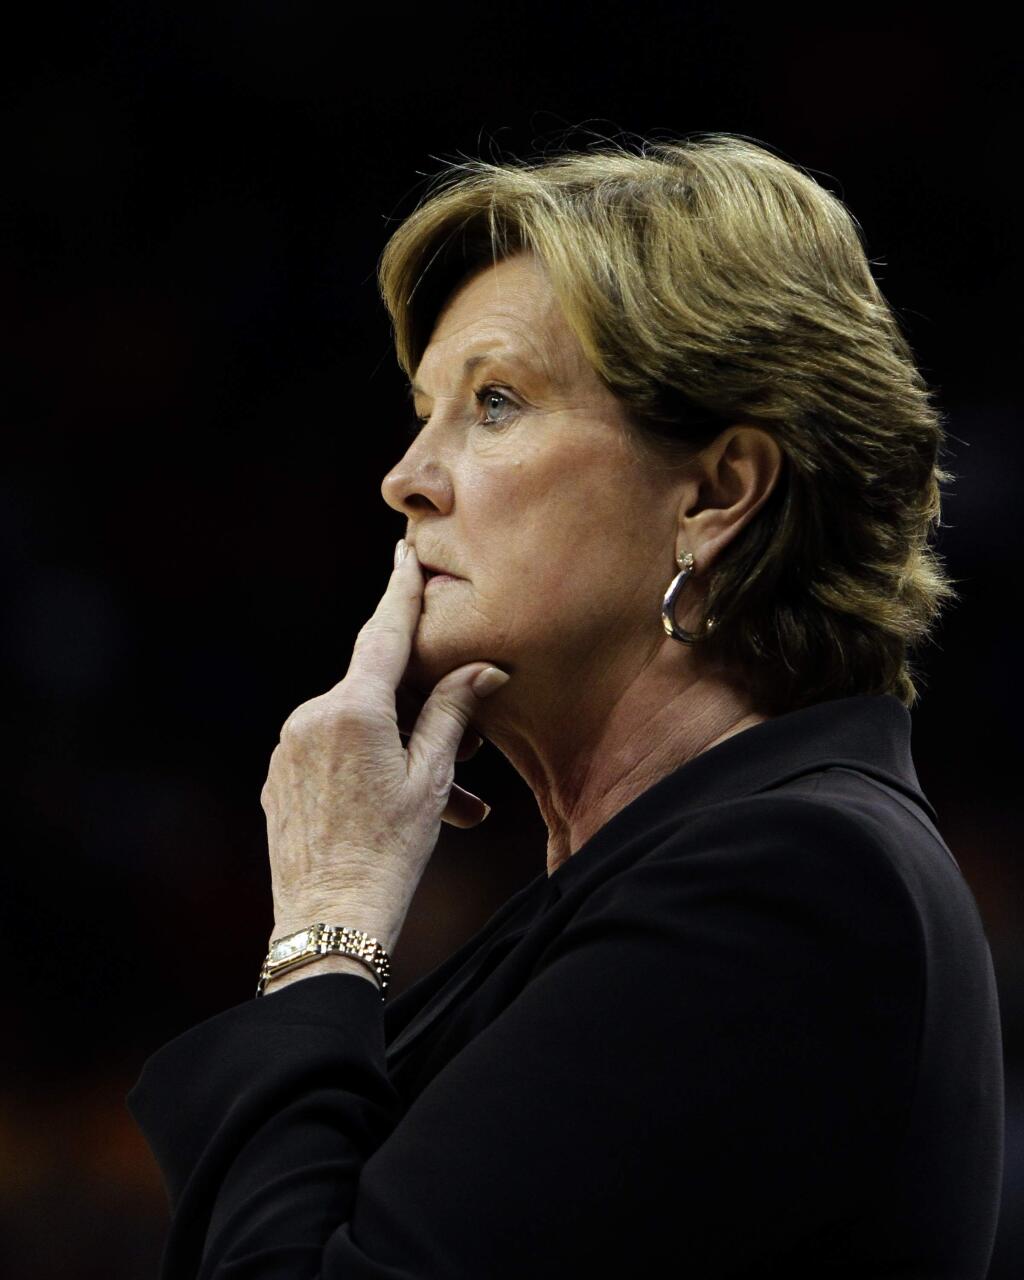 FILE - In this Nov. 12, 2010, file photo, Tennessee coach Pat Summitt watches her team against Louisville in a NCAA college basketball game in Louisville, Ky. Summitt, the winningest coach in Division I college basketball history who uplifted the women's game from obscurity to national prominence during her career at Tennessee, died Tuesday morning, June 28, 2016. She was 64.(AP Photo/Garry Jones, File)